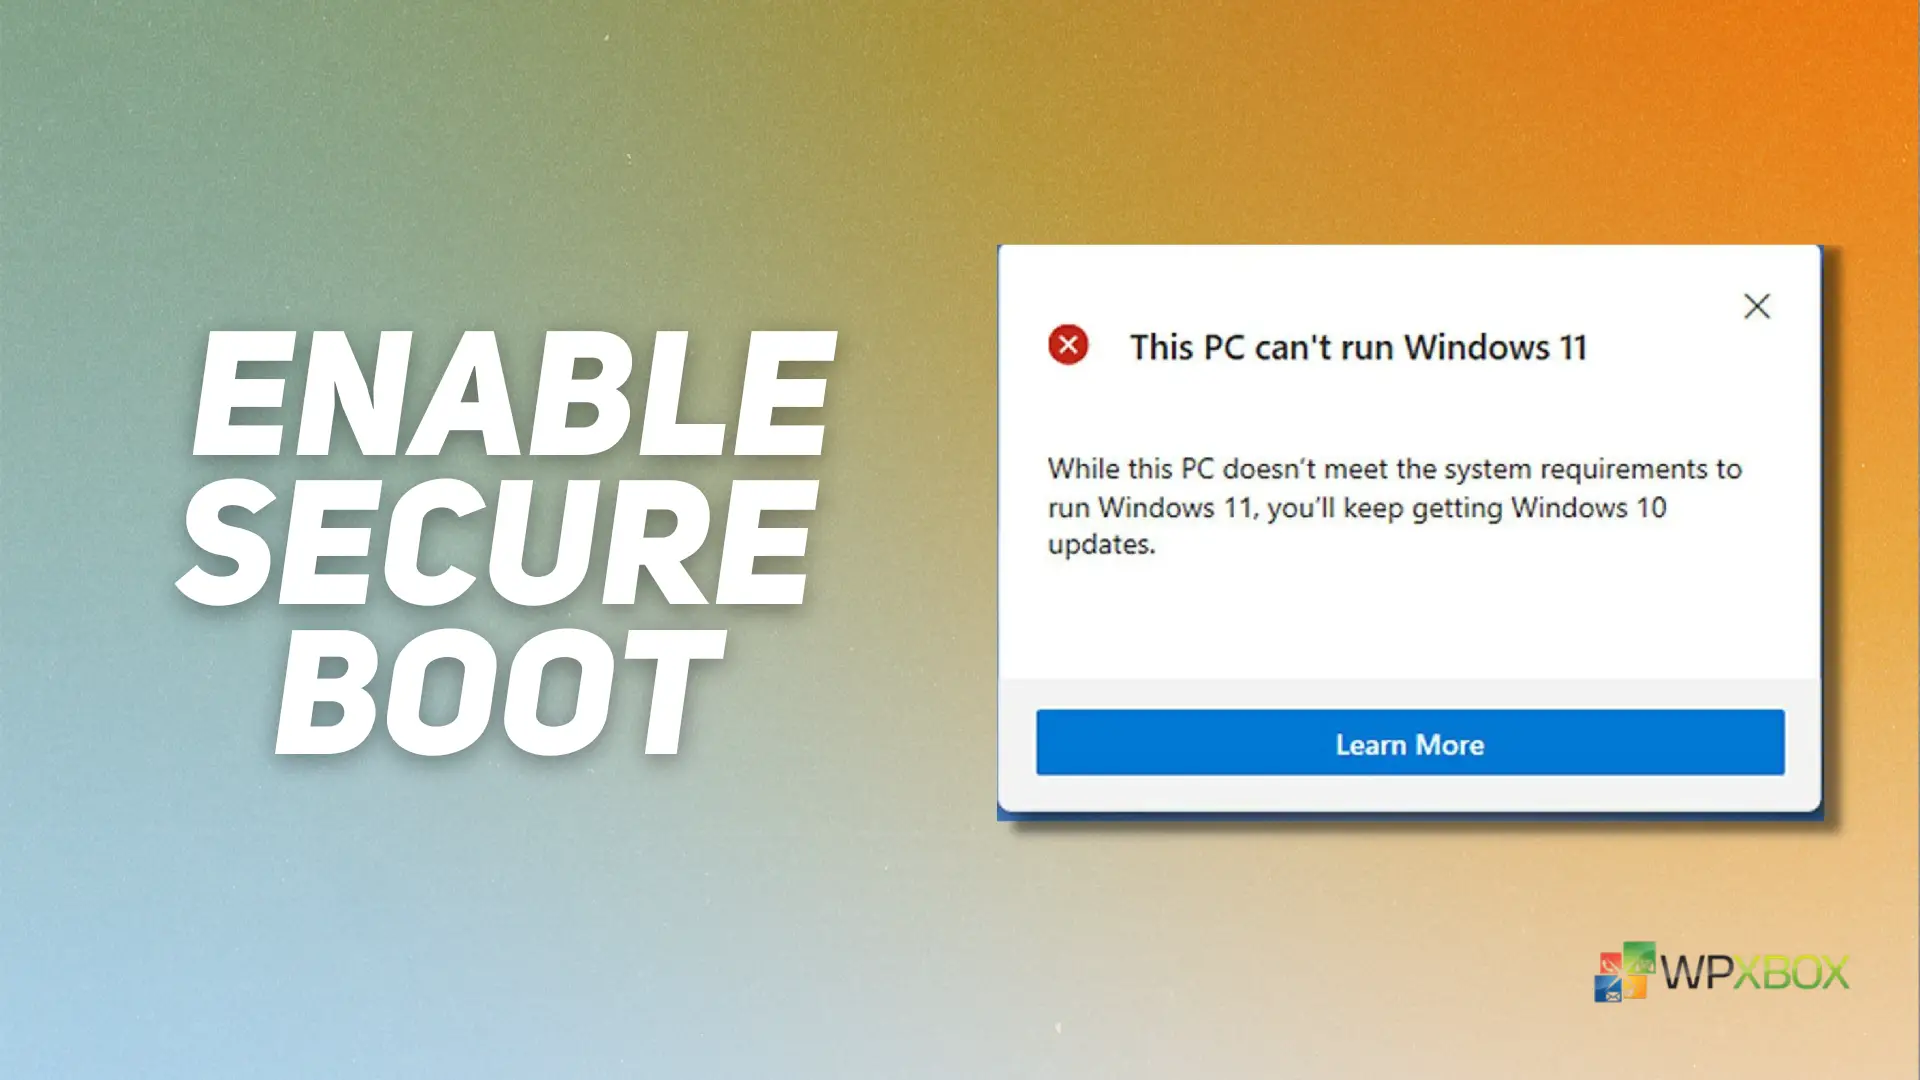 How to Enable Secure Boot on PC to Install Windows 11